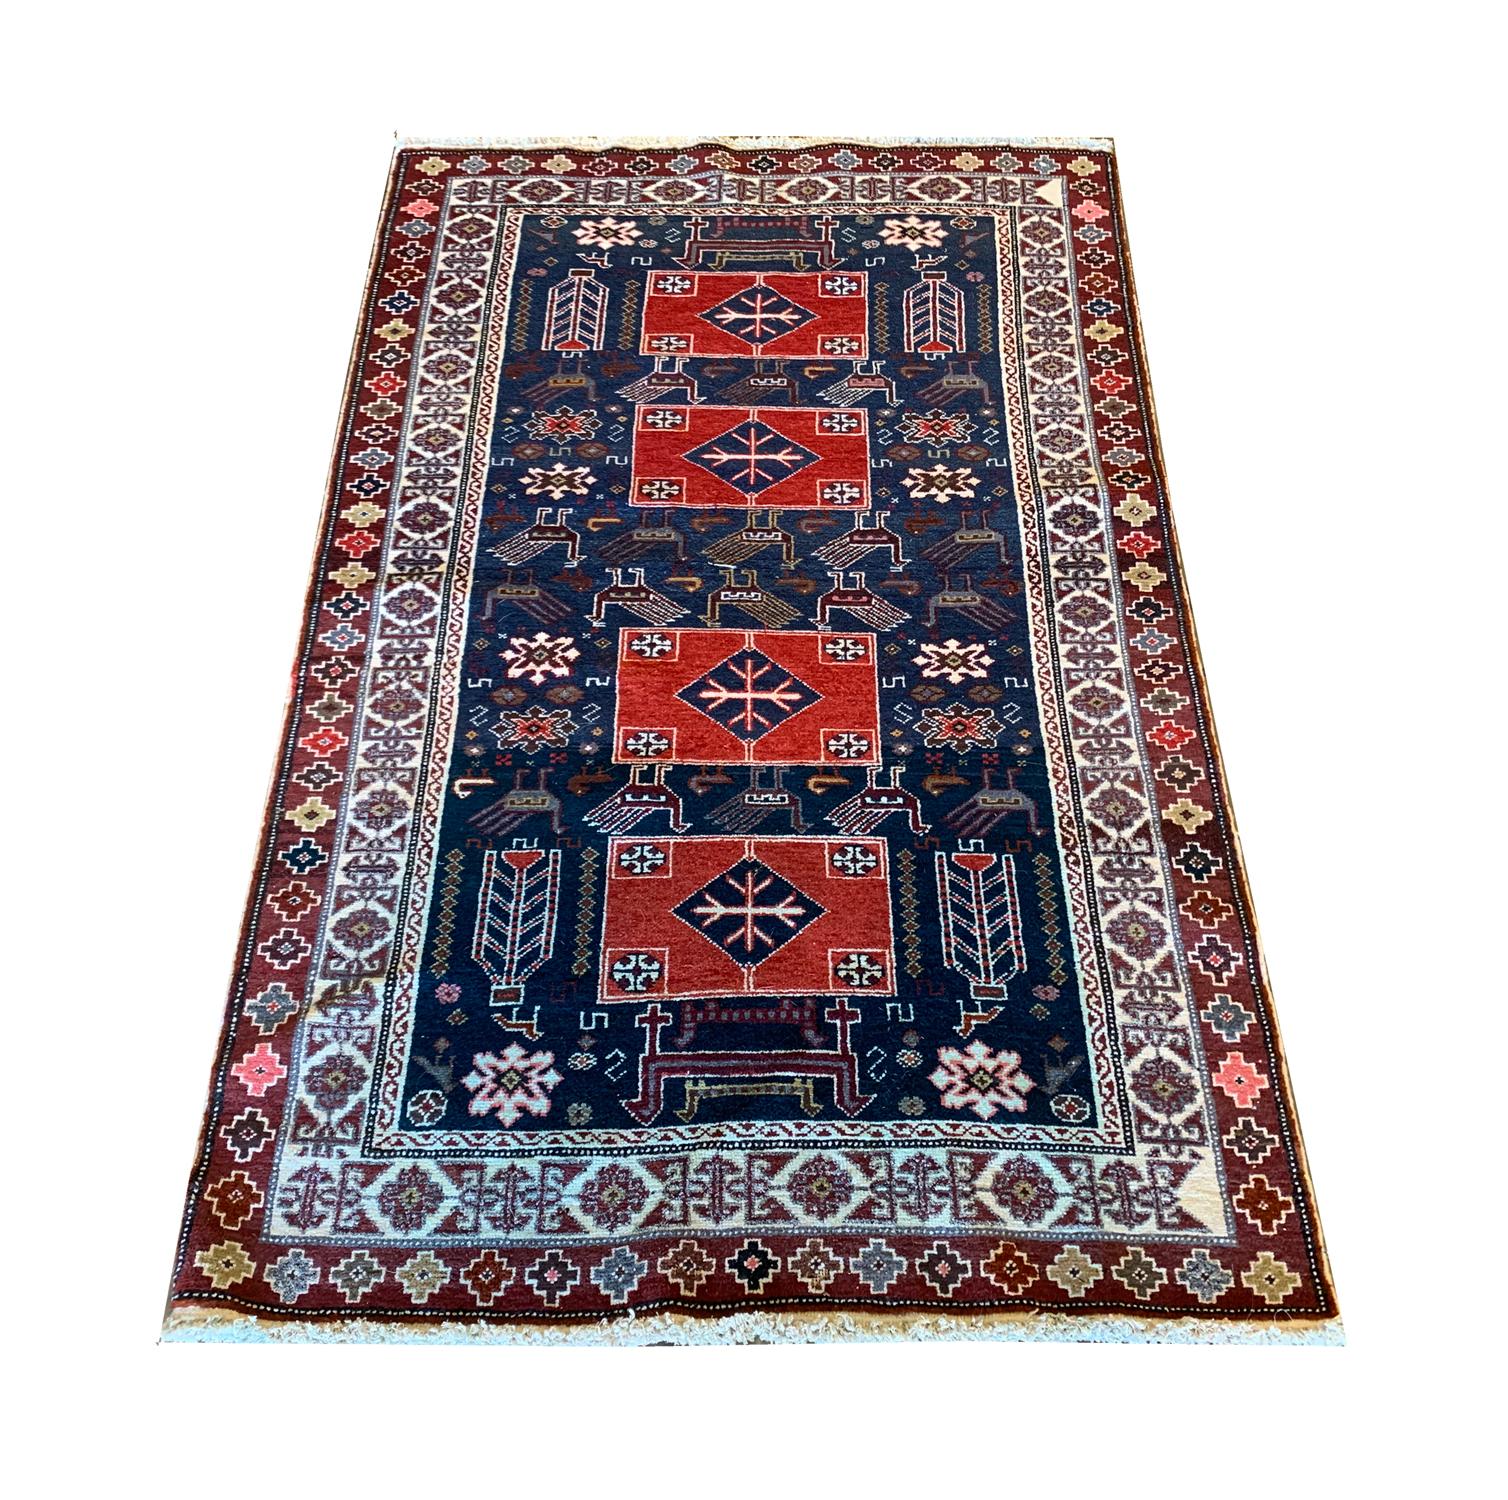 This fine wool rug is an excellent example of antique Caucasian rugs. Woven by hand in the 1880s with a bold statement design. The central pattern has been woven on a deep blue field with stand out red medallions and animal motifs surrounding the